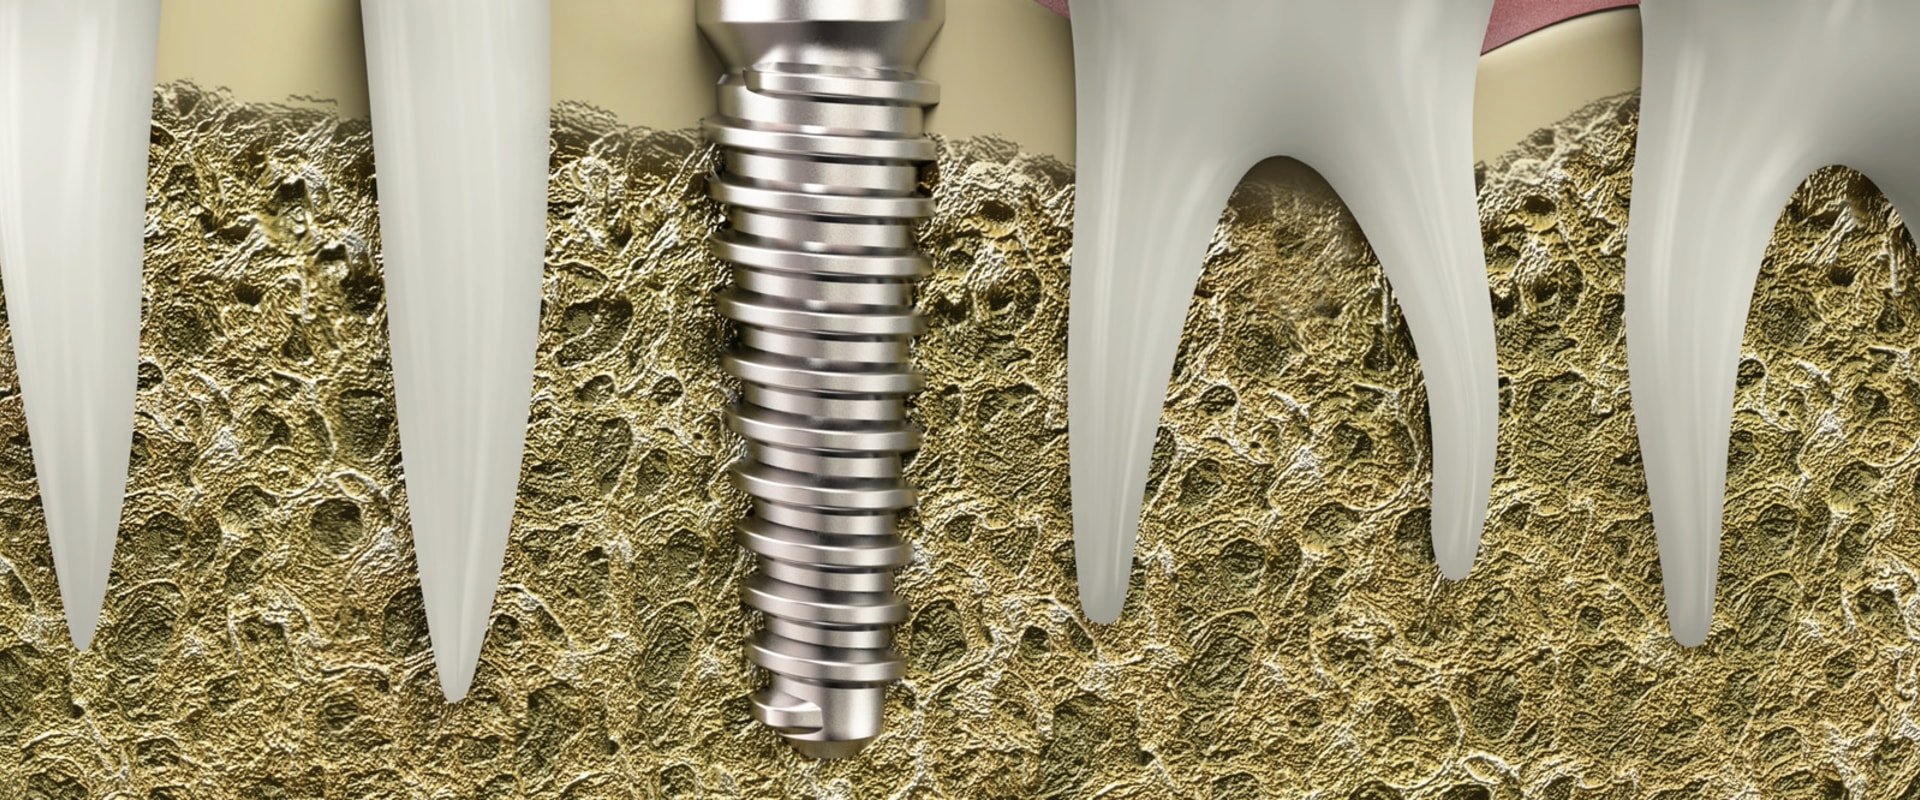 Why am i not suitable for dental implants?